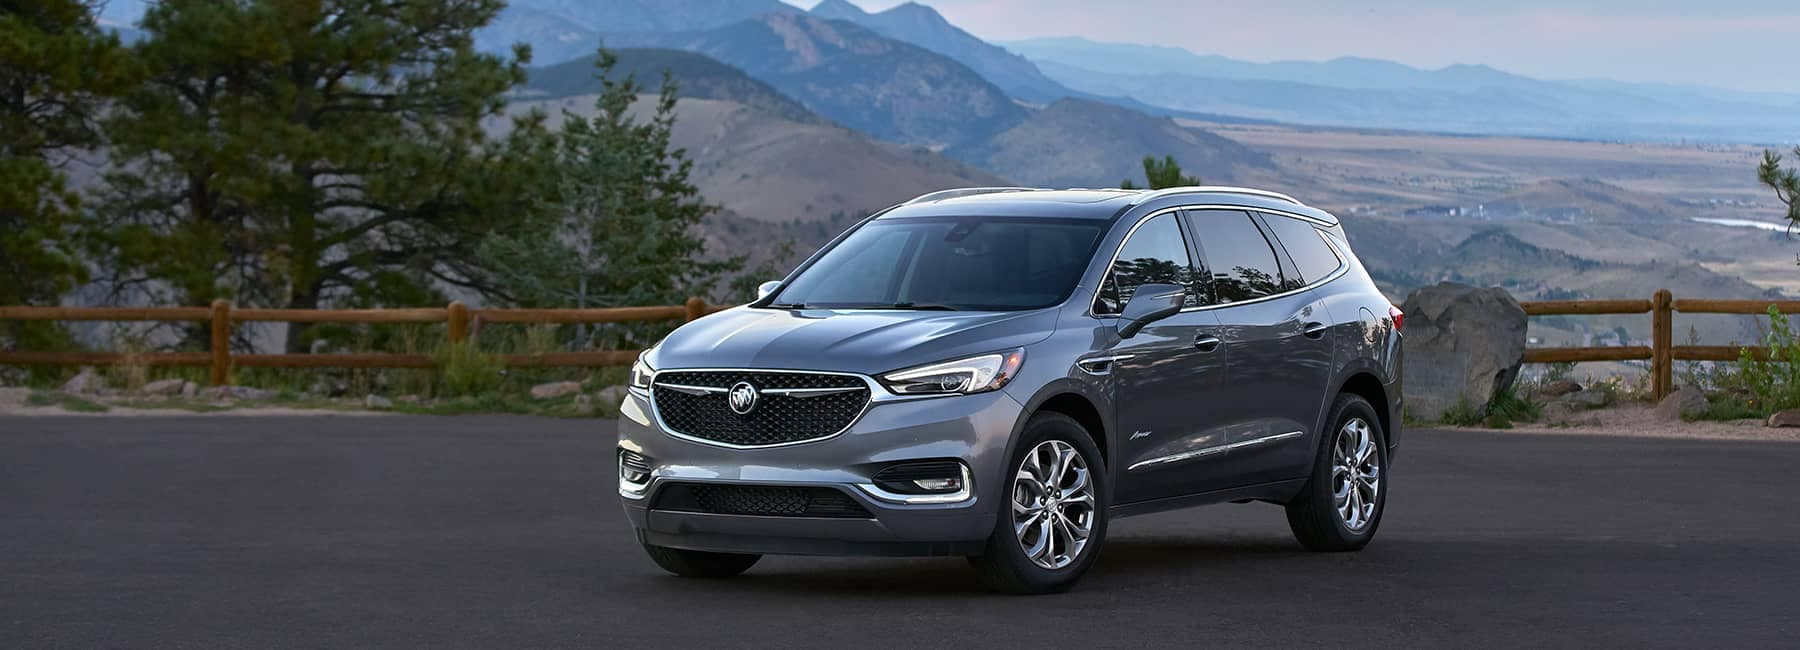 Grey 2020 Buick Enclave on a Mountain Overpass